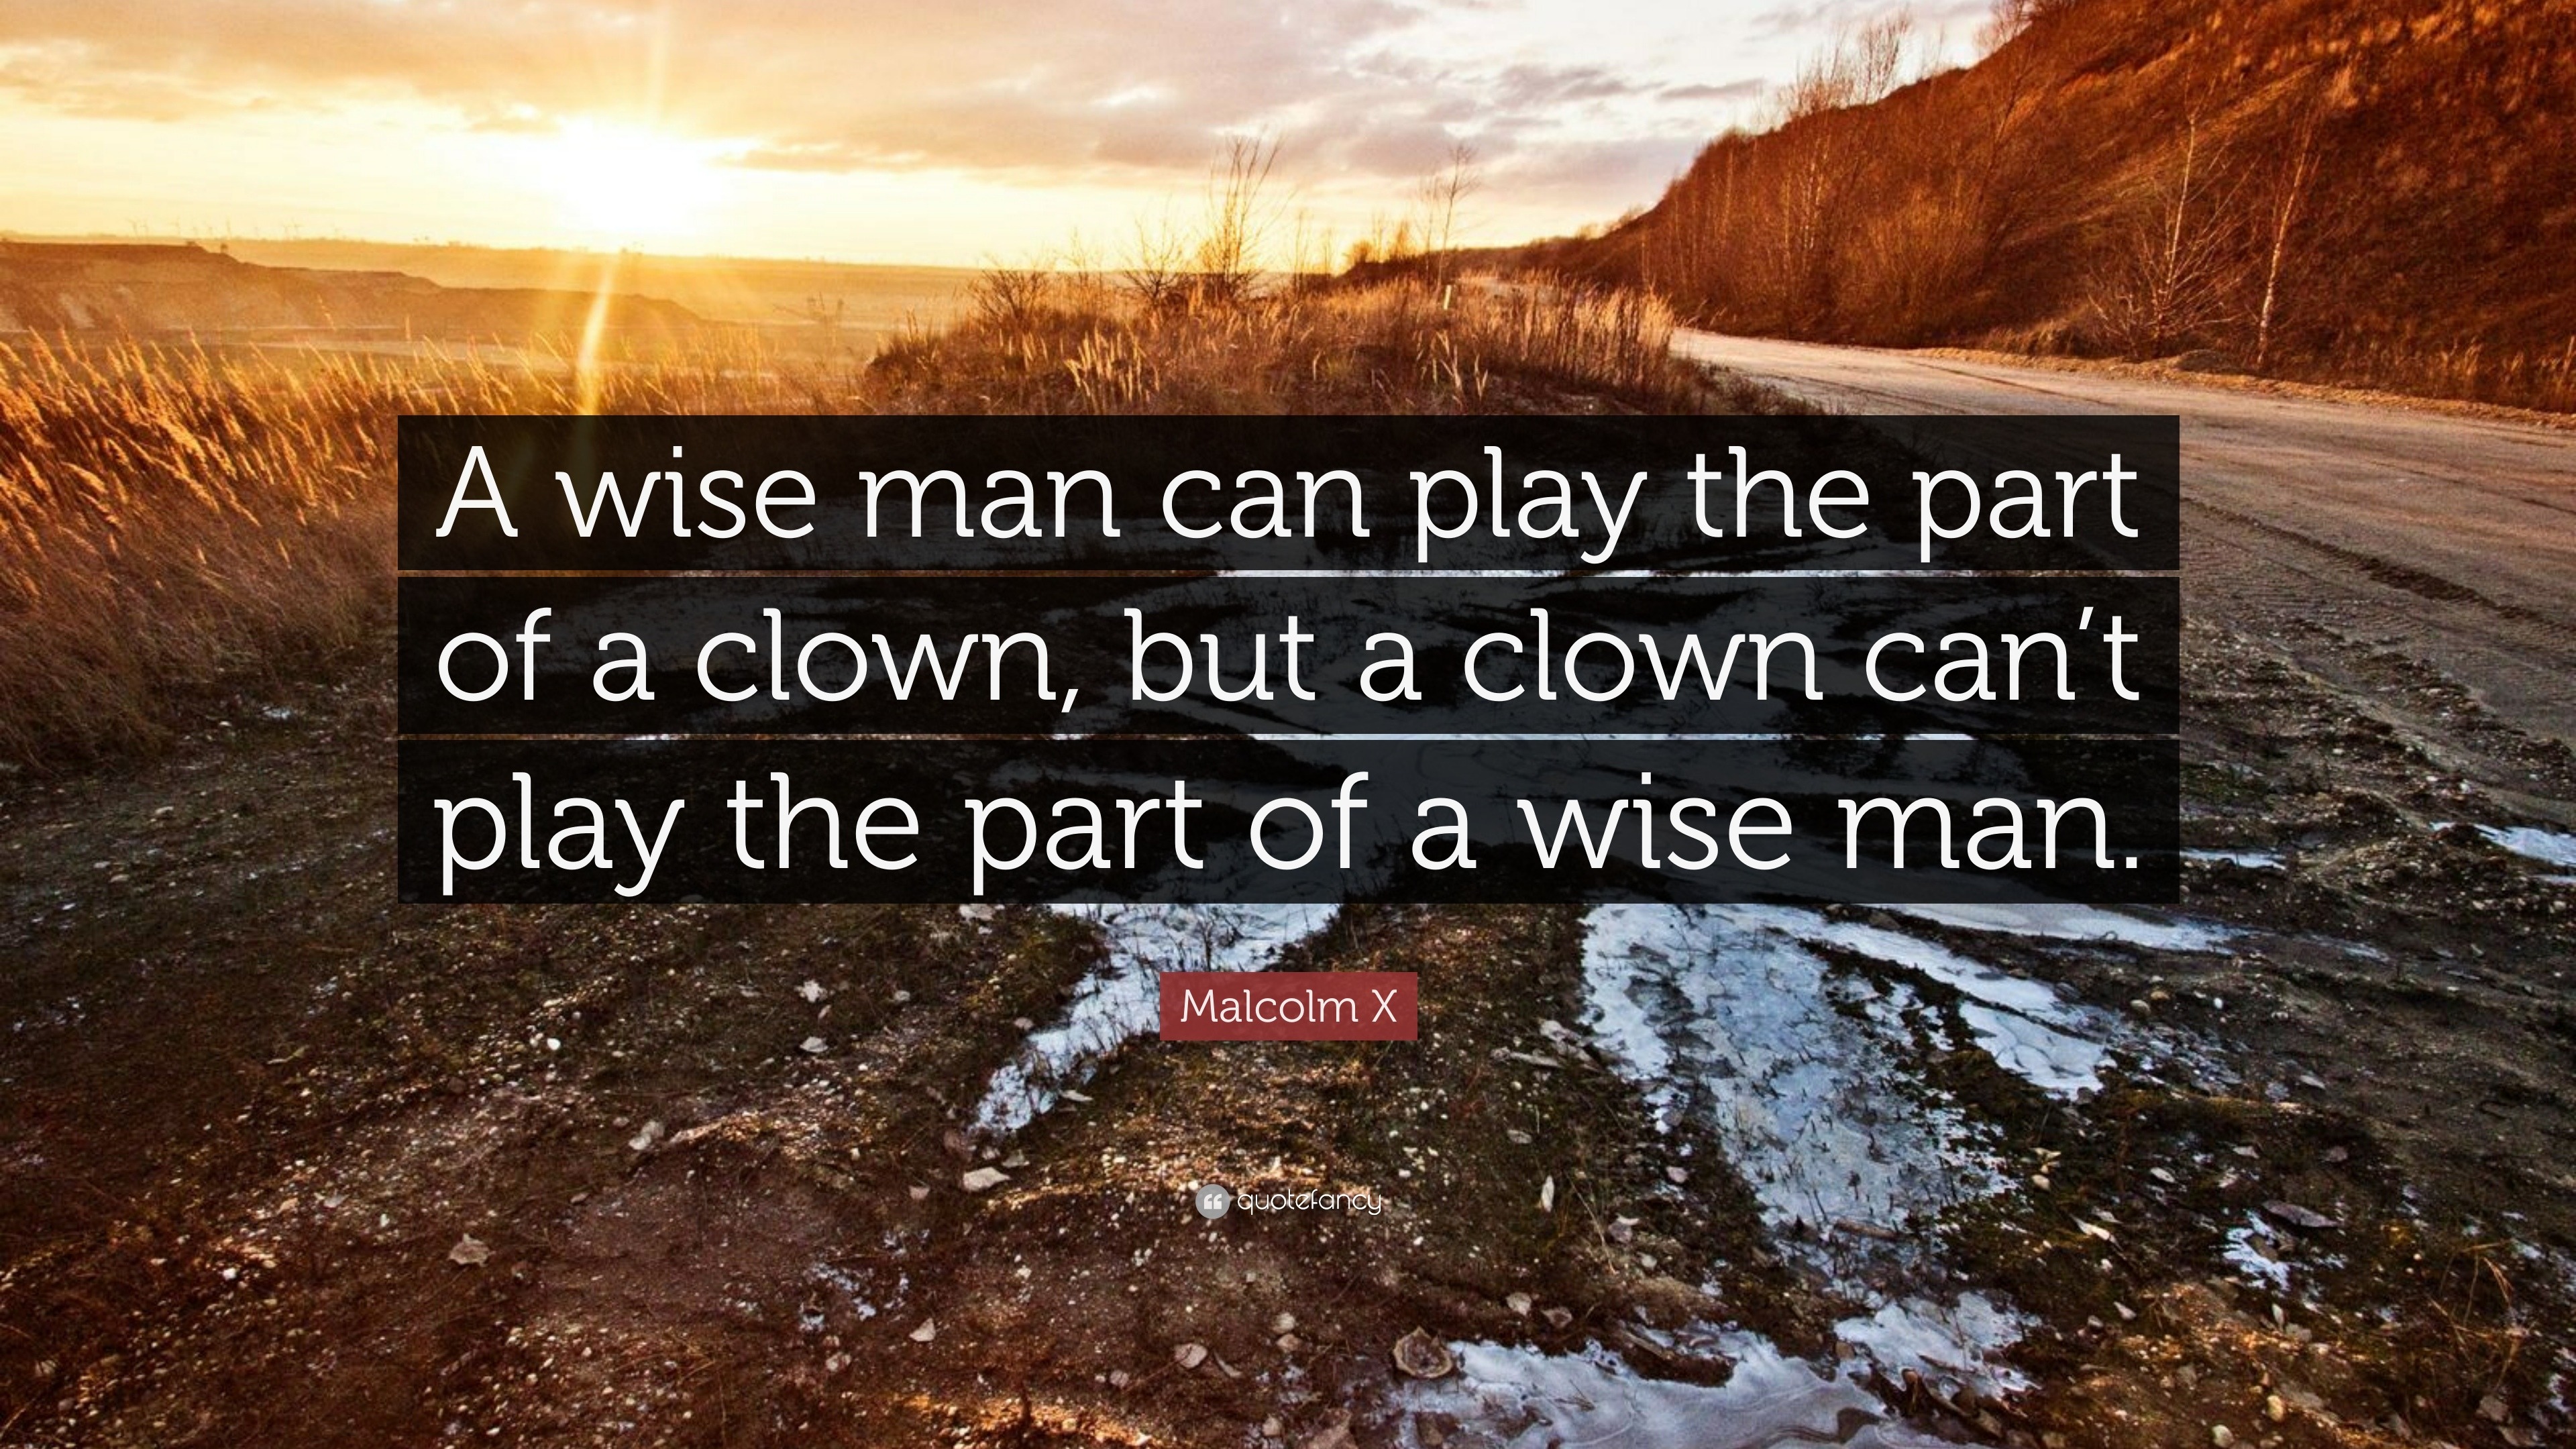  Part of a Clown - Malcolm X Quote Famous Life